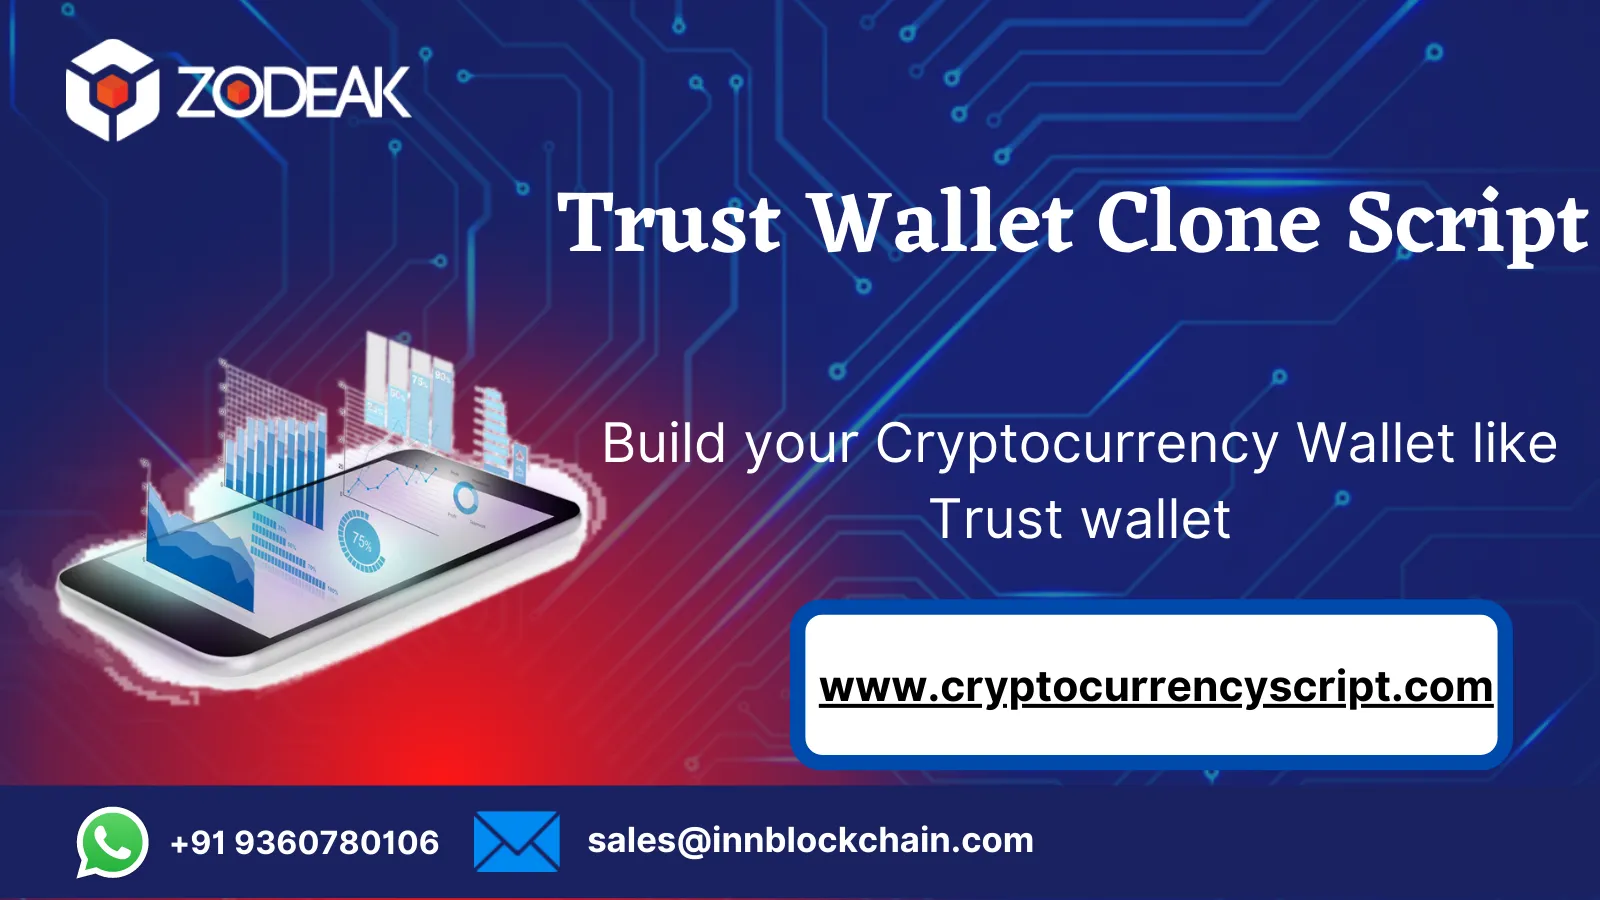 Trust Wallet Clone Script - Create your own Cryptocurrency Wallet like Trust Wallet